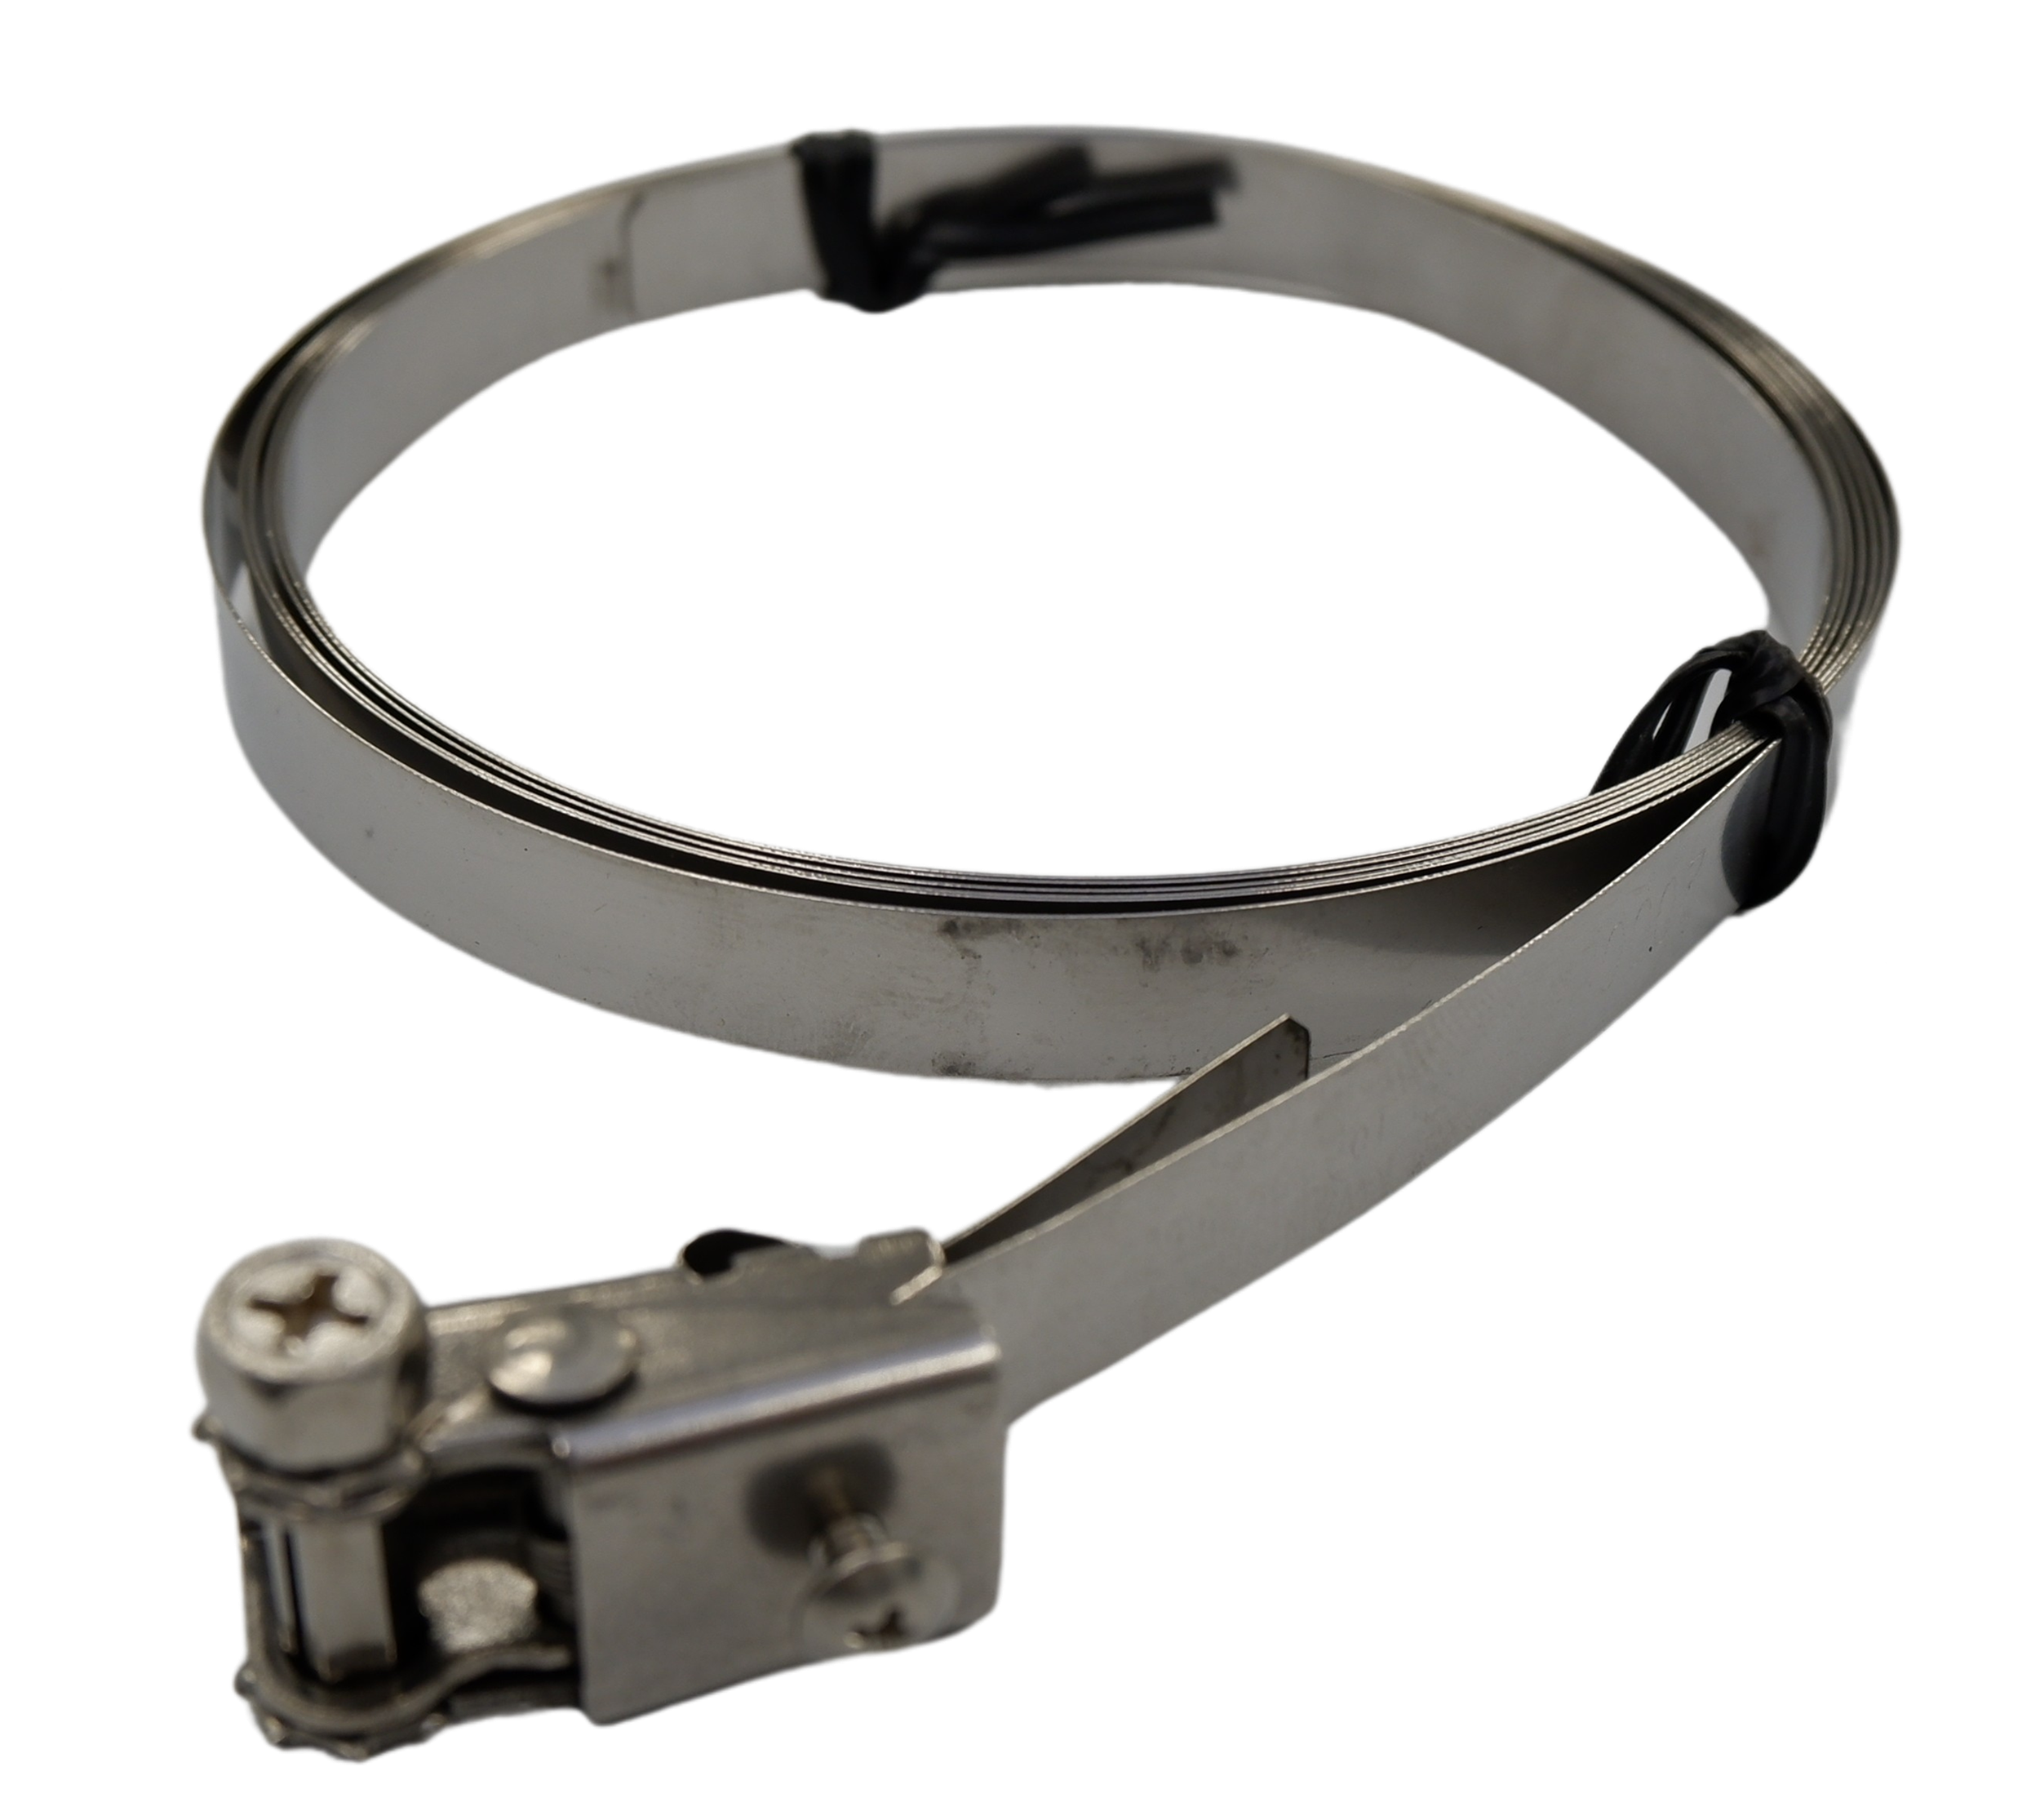 Self Tensioning Stainless Steel 316 High Pressure Band Clamps - Pack of 5 Clamps